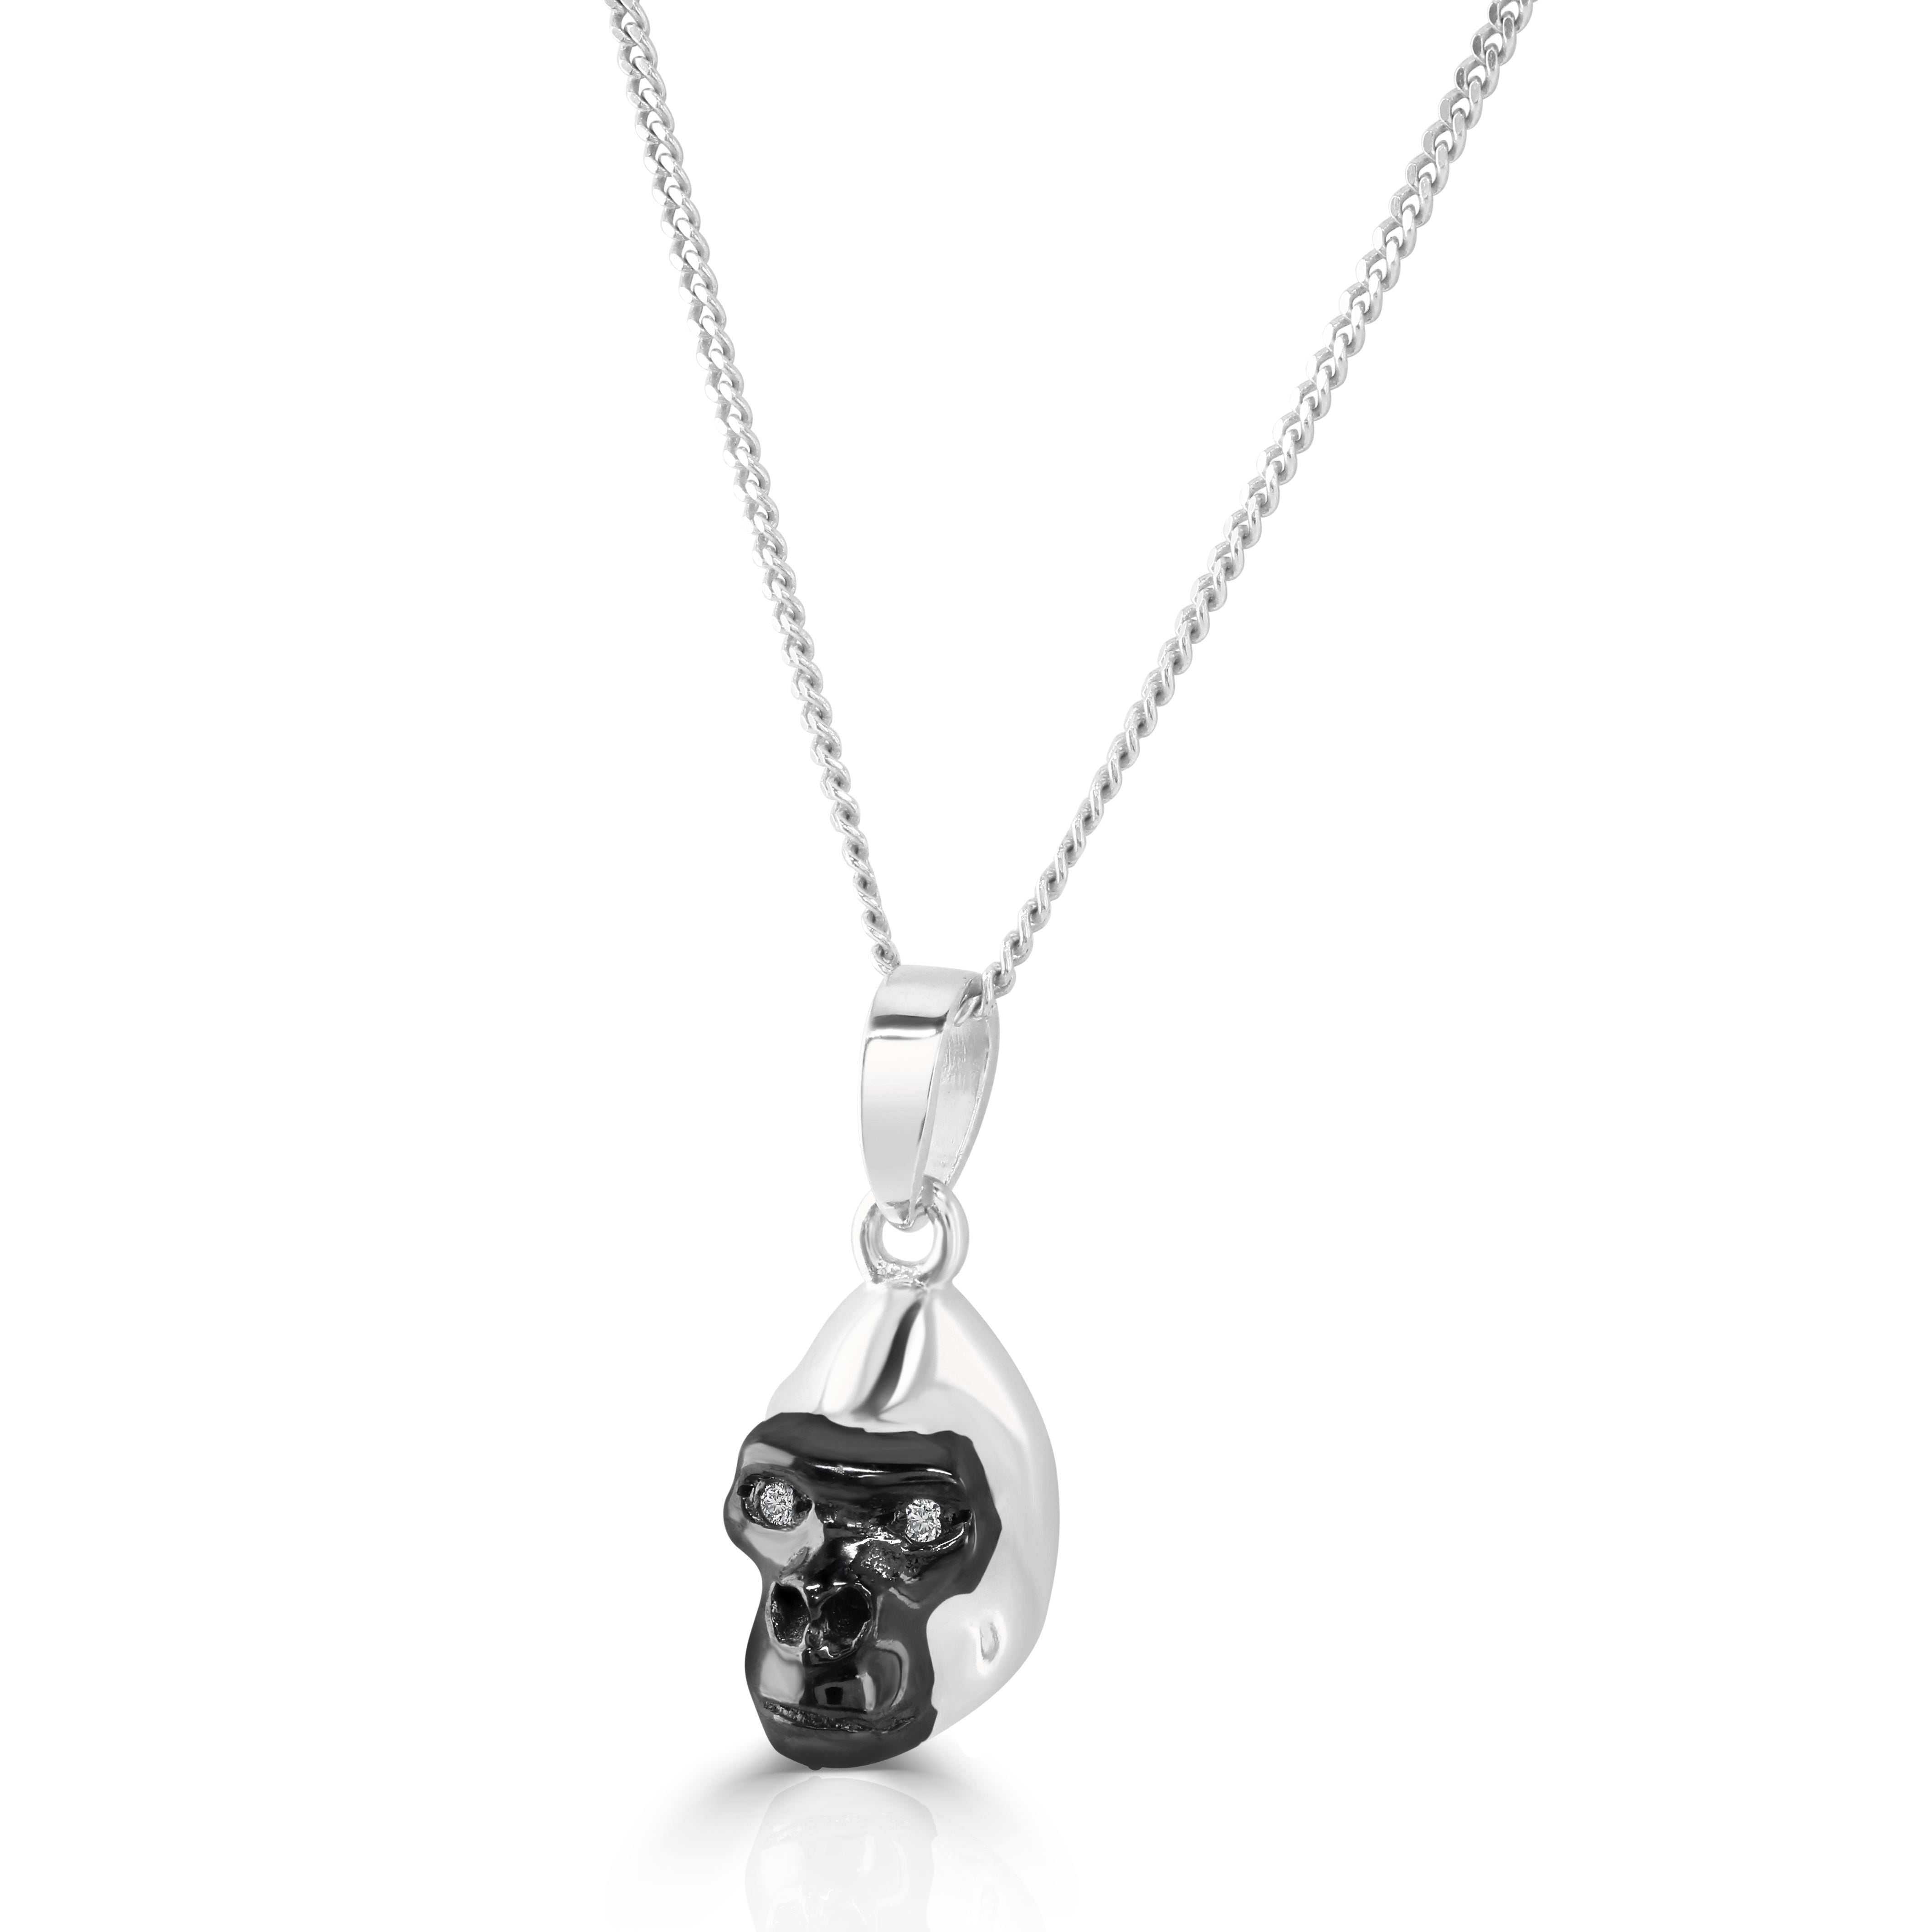 Sterling Silver Gorilla necklace